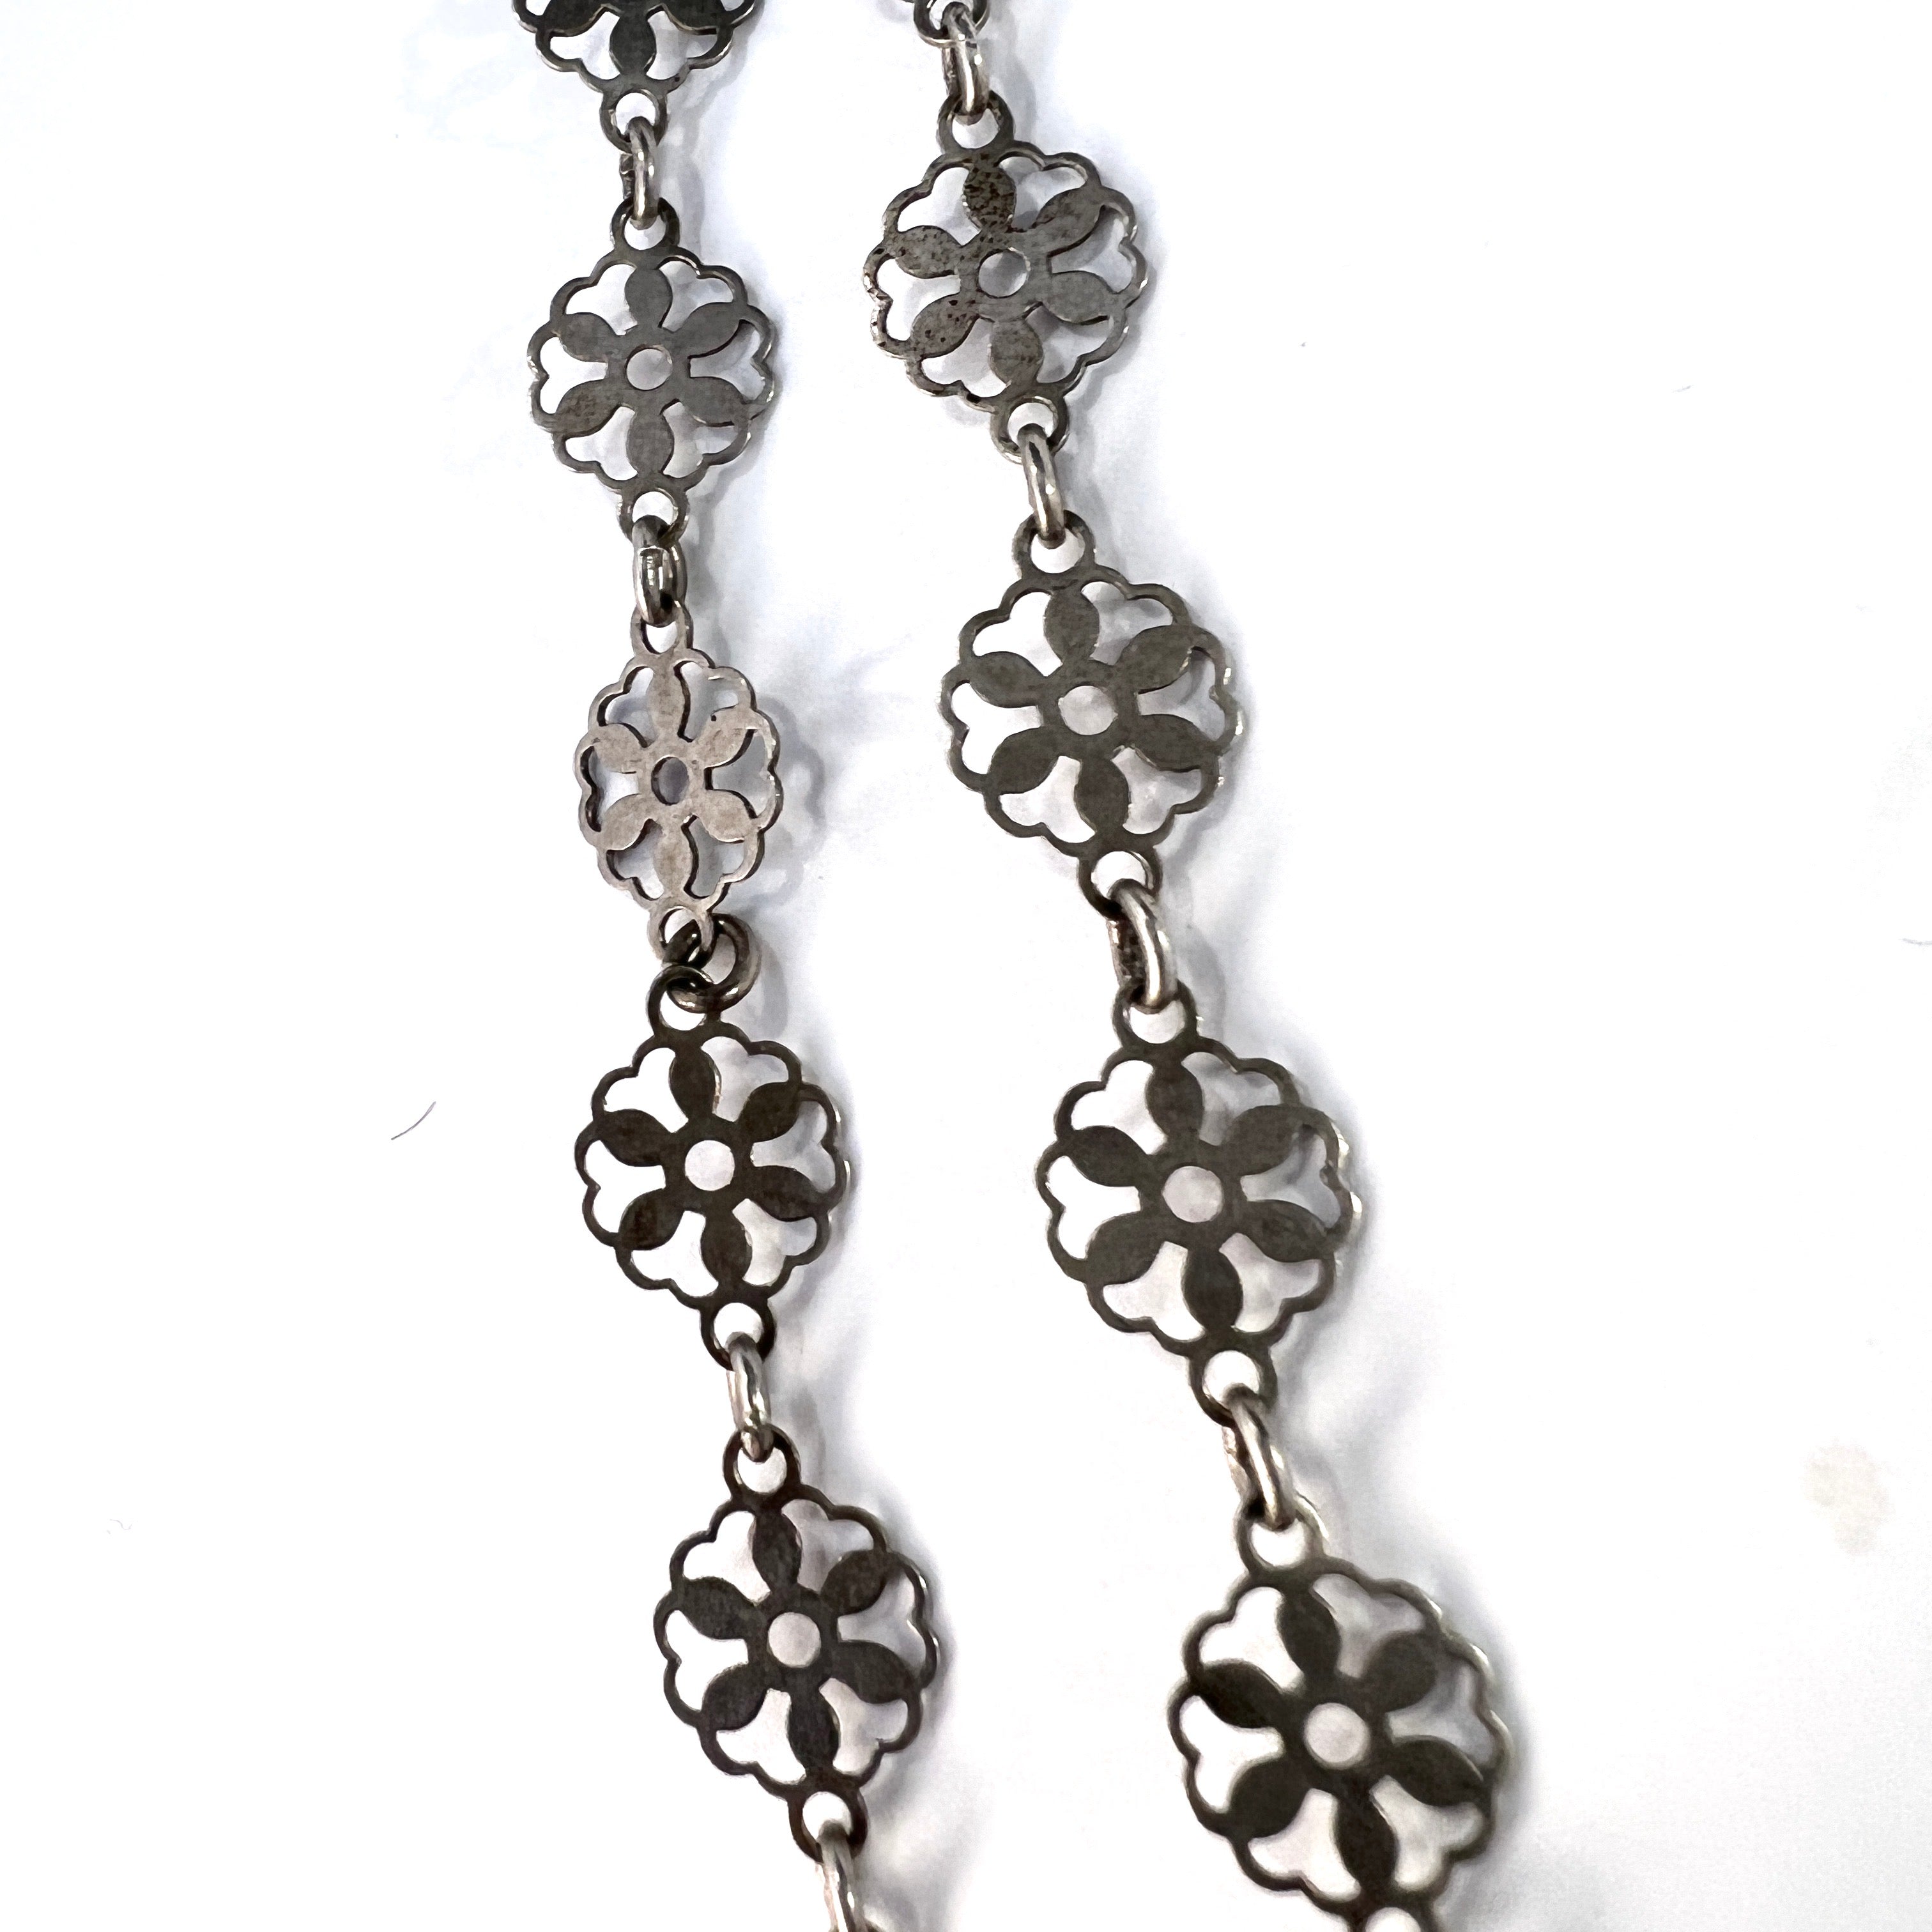 Sweden. Antique Solid Silver 60 inch Longuard Chain Necklace.